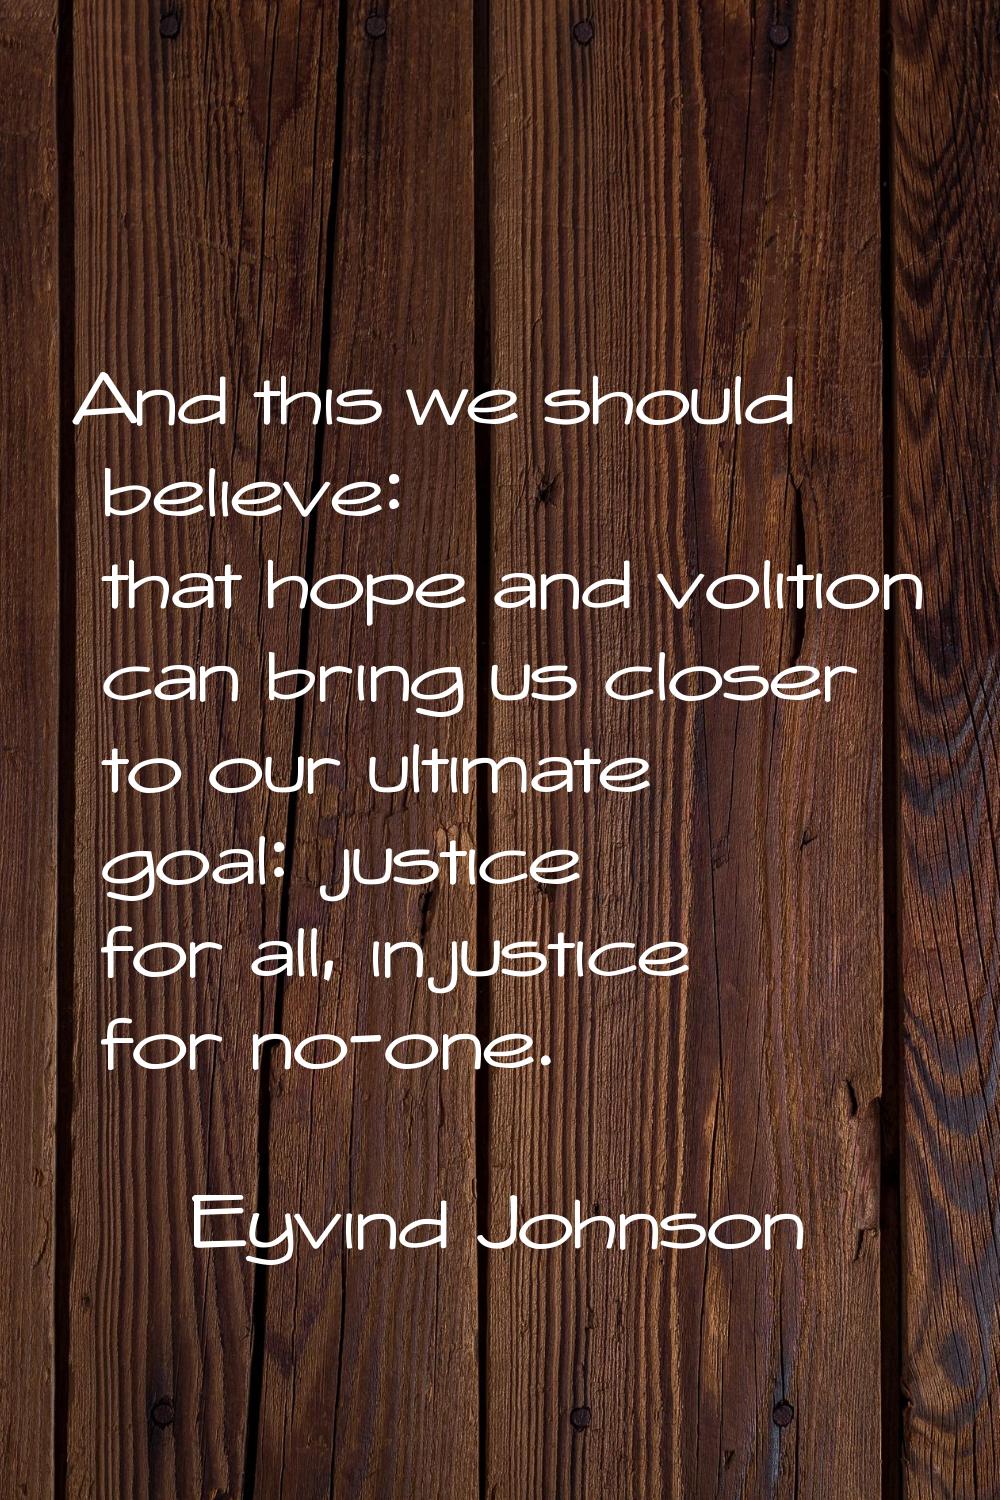 And this we should believe: that hope and volition can bring us closer to our ultimate goal: justic